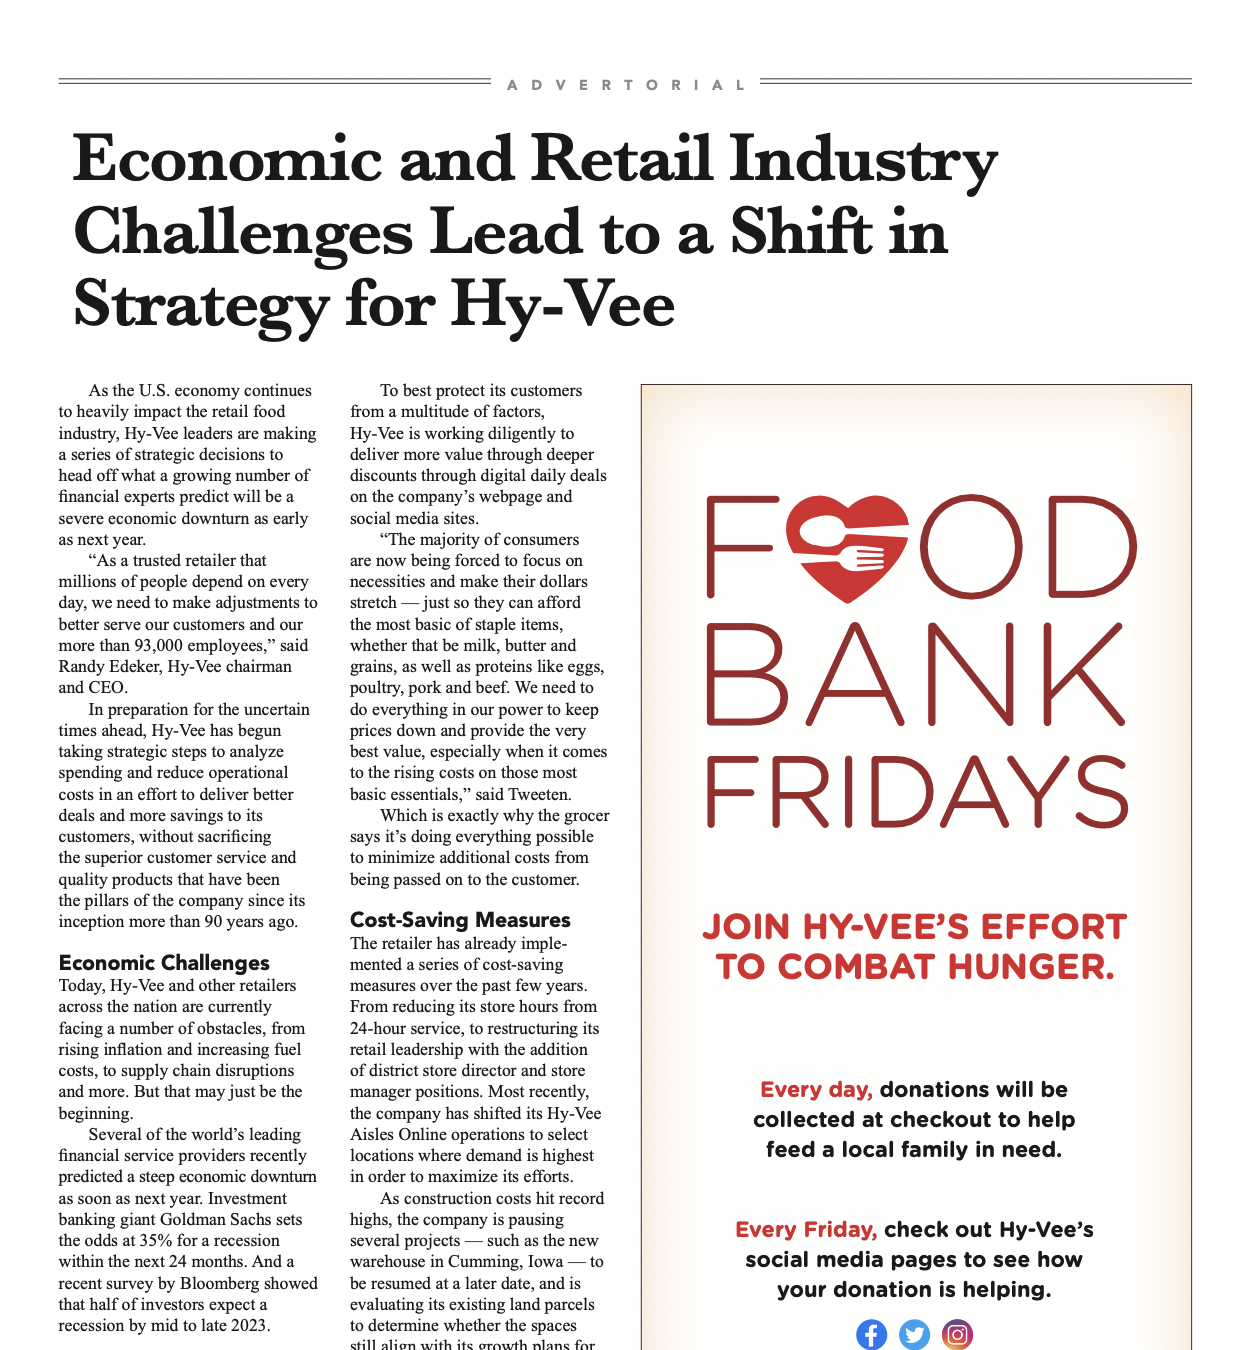 A portion of the advertisement ran by Hy-Vee